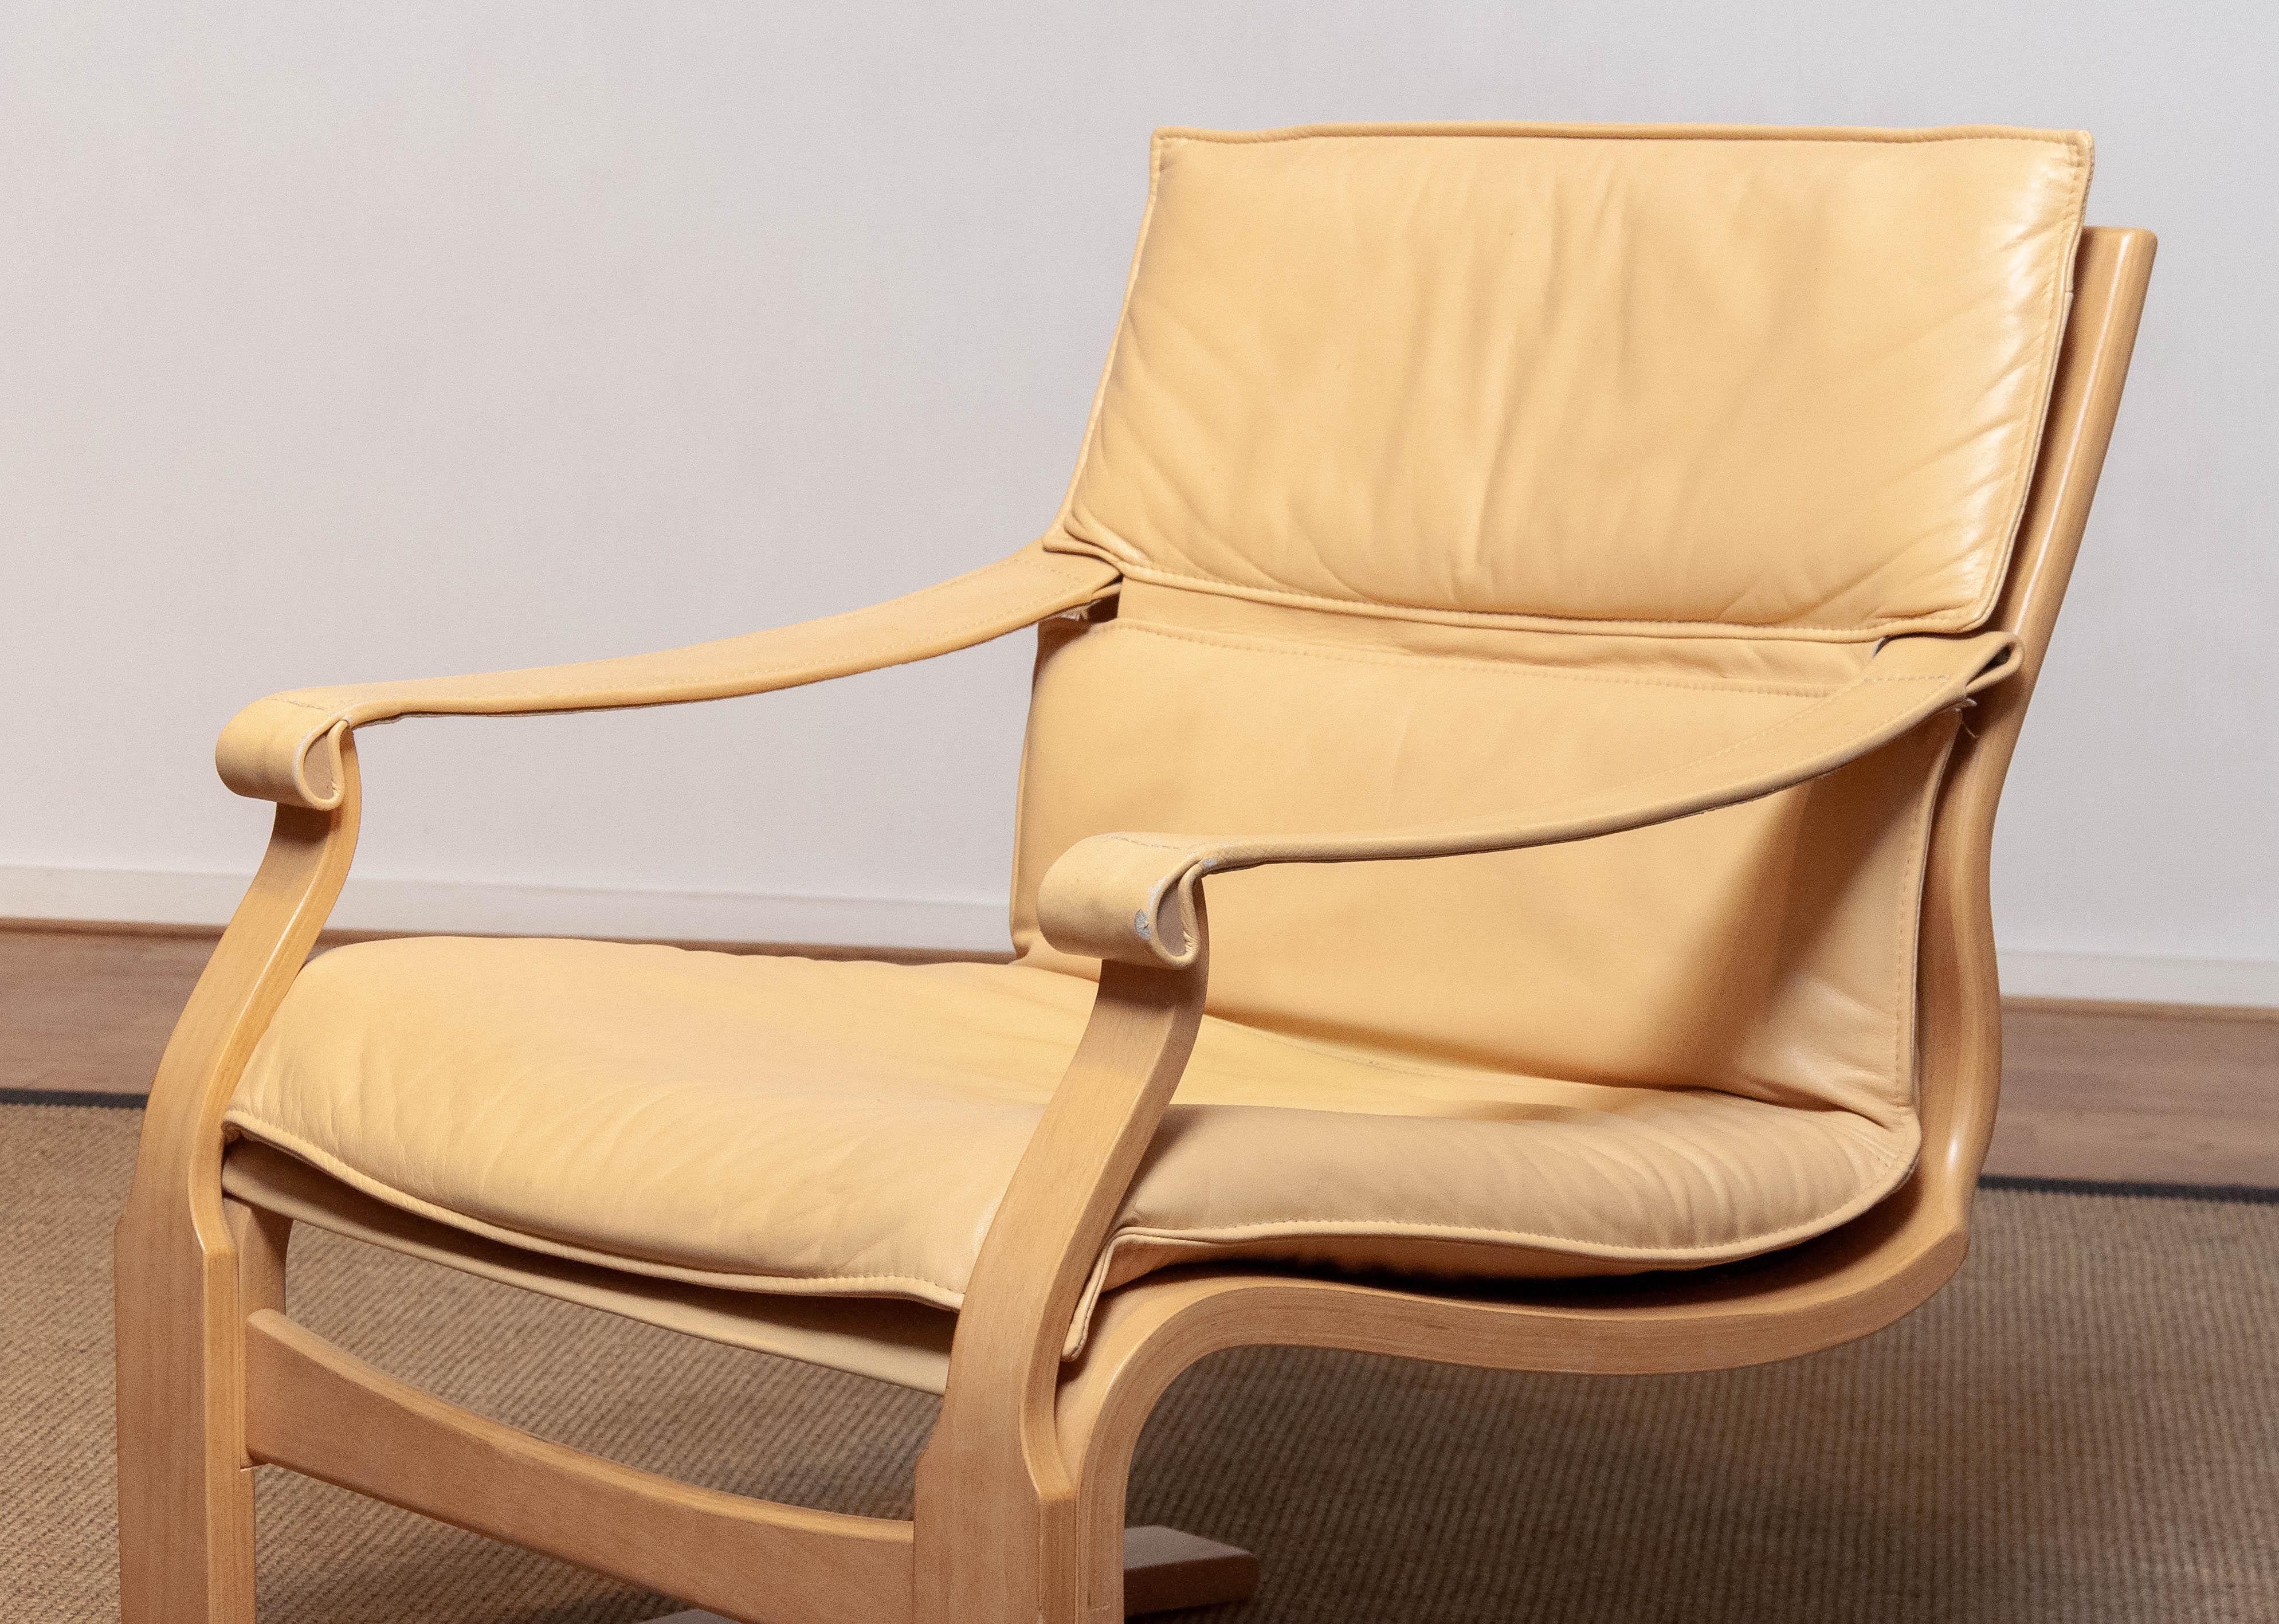 Bentwood with Beige / Creme Leather Lounge Easy Chair by Ake Fribytter for Nelo For Sale 2